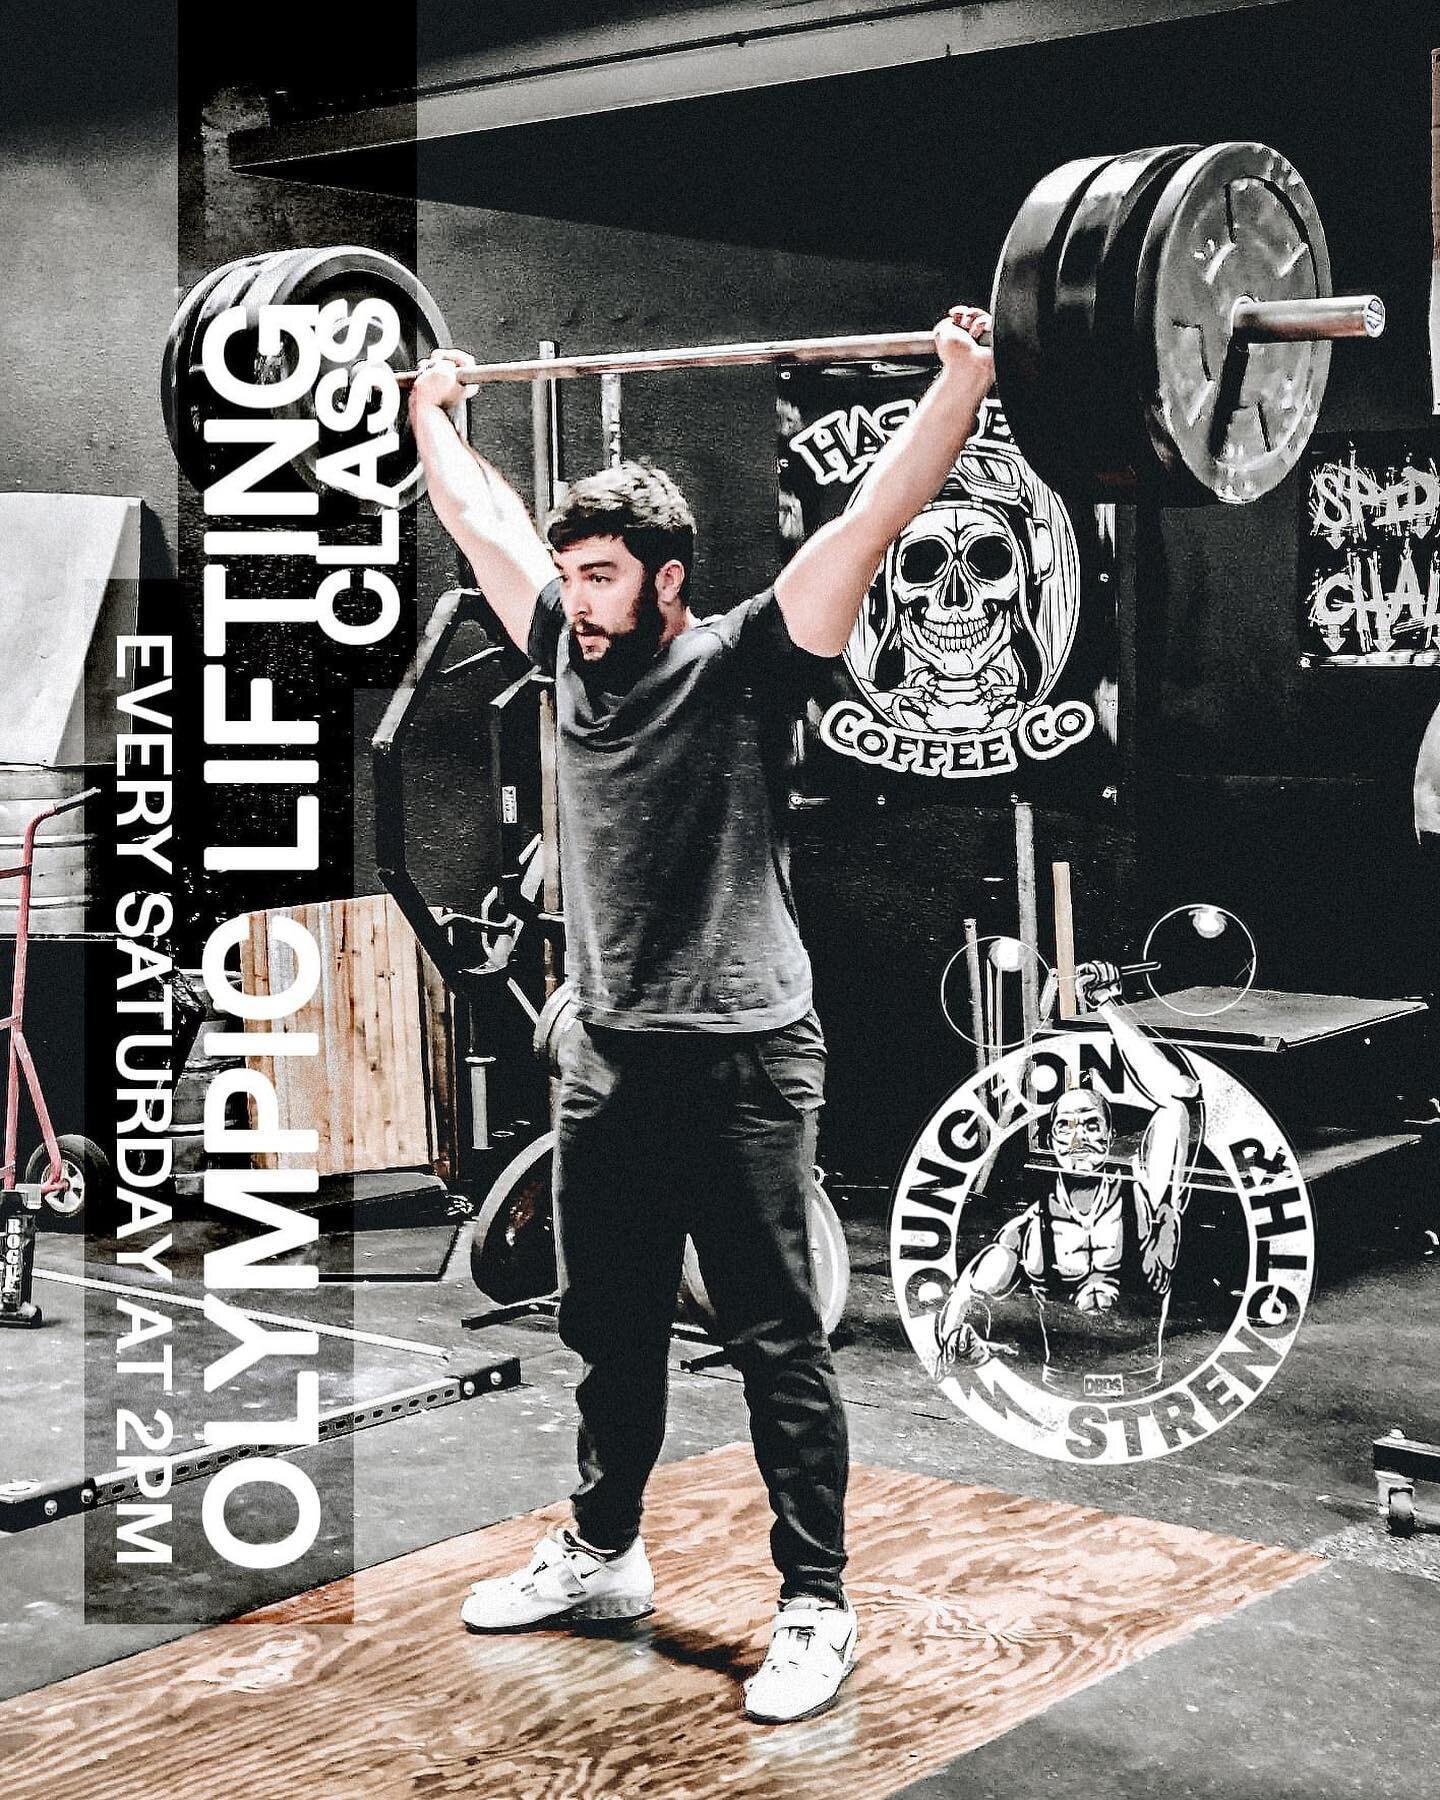 Take advantage of our new Olympic lifting class now available every Saturday at 2PM. Class is FREE for all DSRX members.

https://www.dungeonstrengthrx.com/

#dungeonstrengthrx

#powerlifting #strongman #squat #bench #deadlift #strongwoman #liftheavy